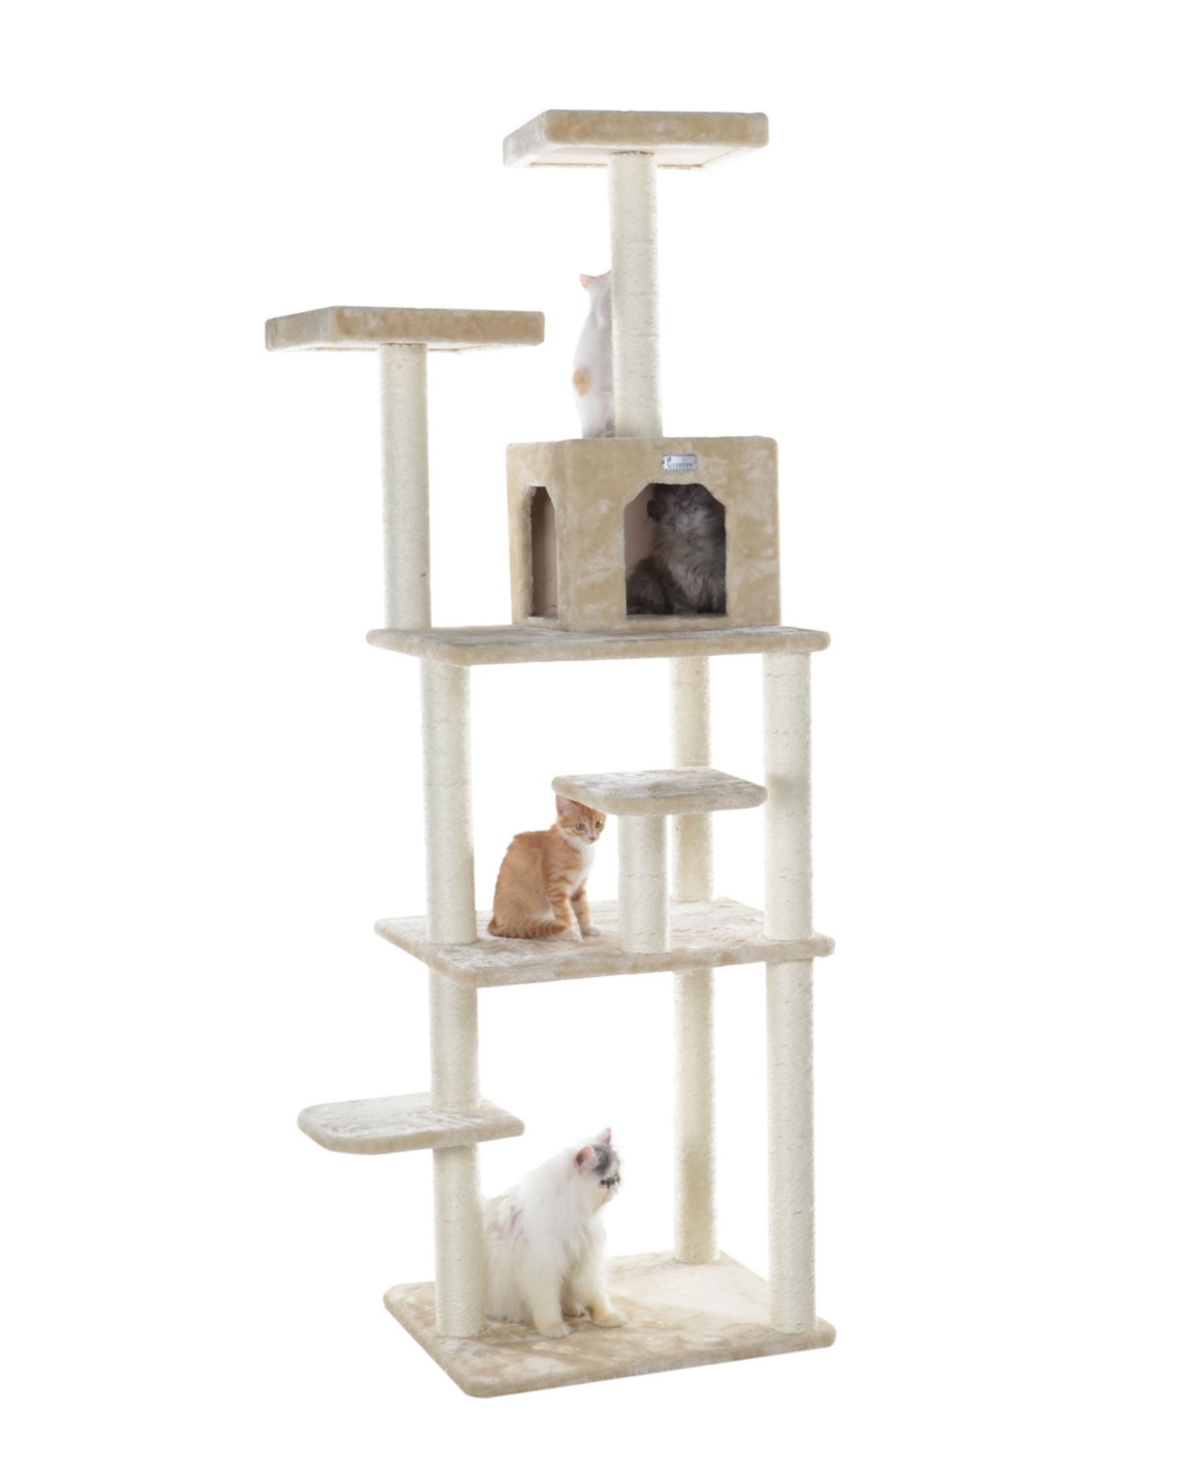 GleePet 74-Inch Real Wood Cat Tree With Seven Levels - Beige